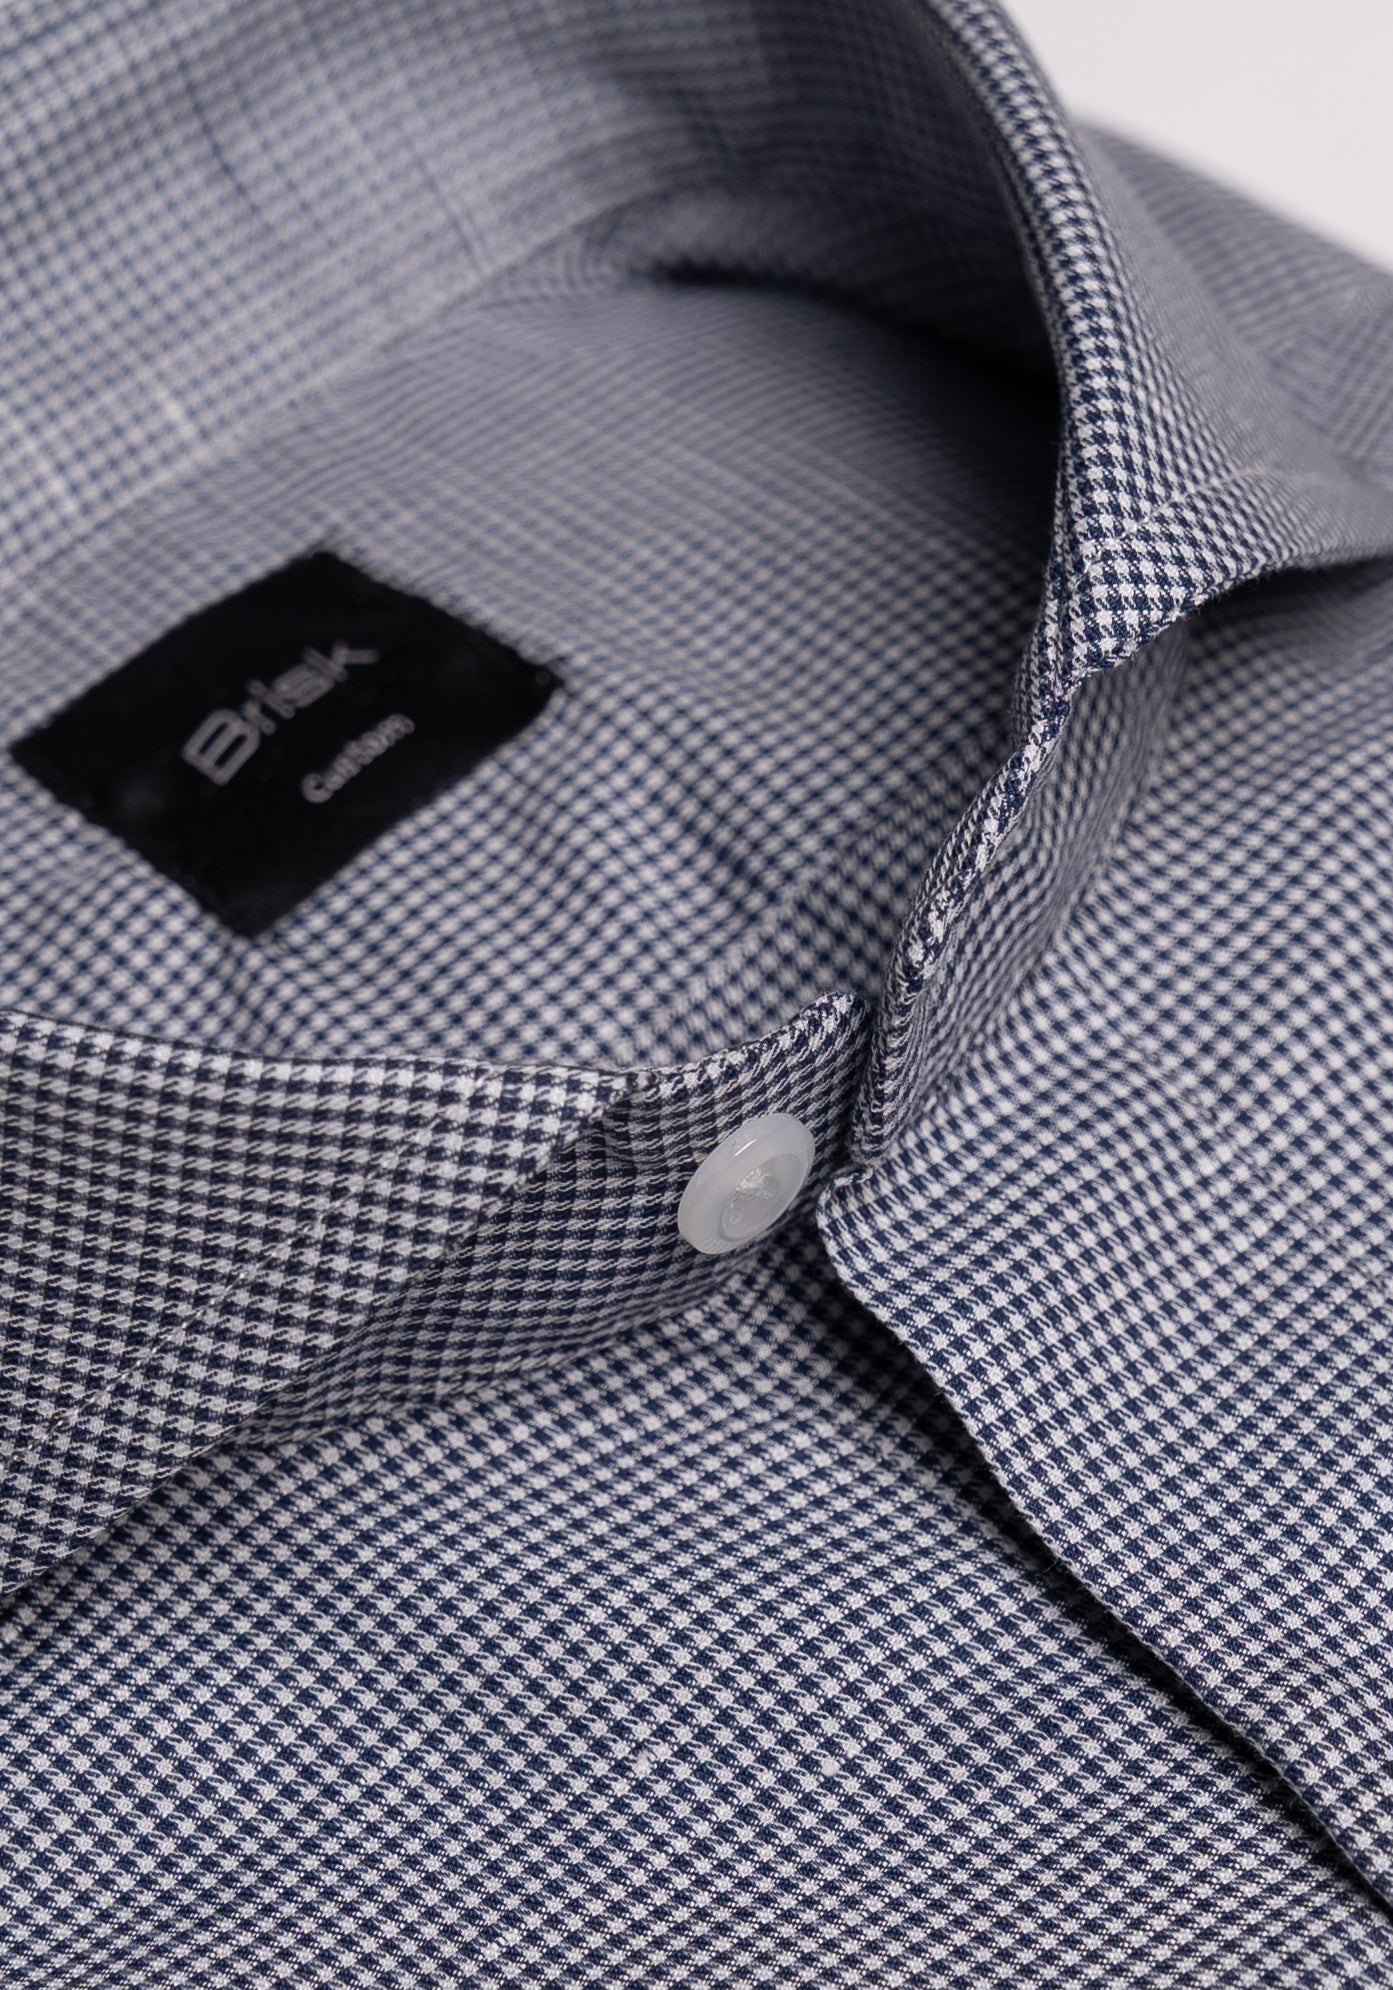 Charcoal Grey Mini Houndstooth Cotton Linen - SALE